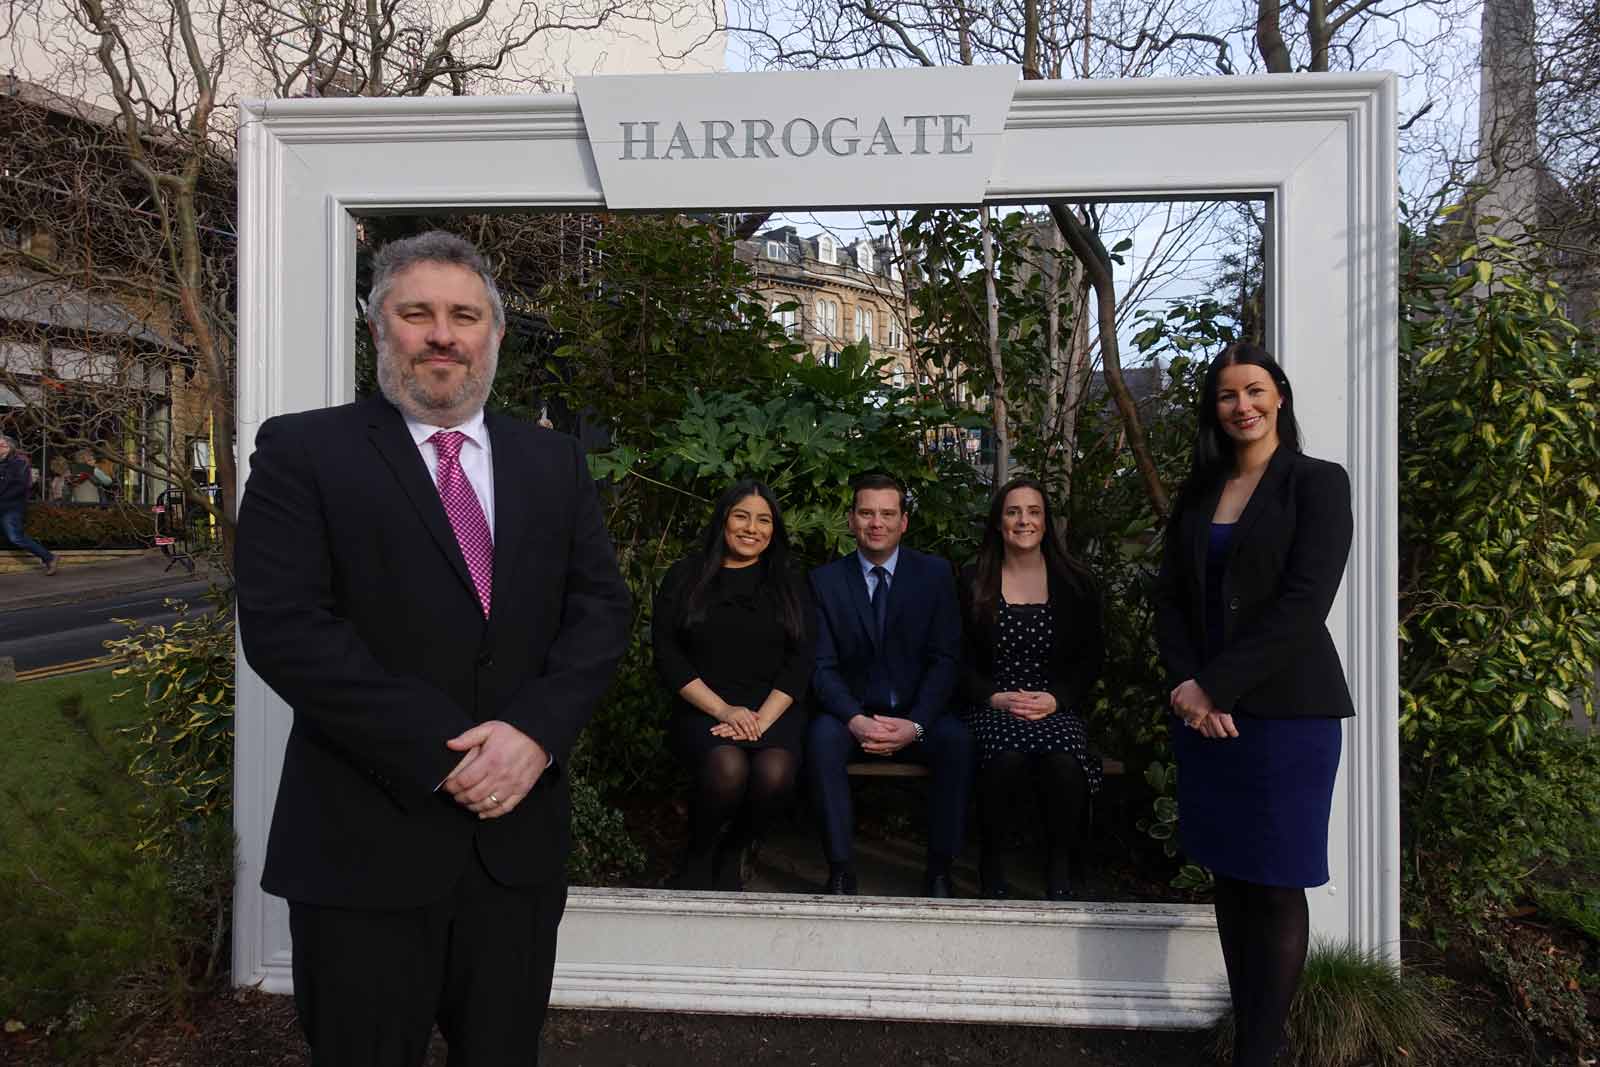 Welcome to Harrogate ... the team from Milners solicitors including (from left) Simon Bass, Alexandra Knight, Mat Haynes, Jessica Savage, and Elizabeth Shaduwa